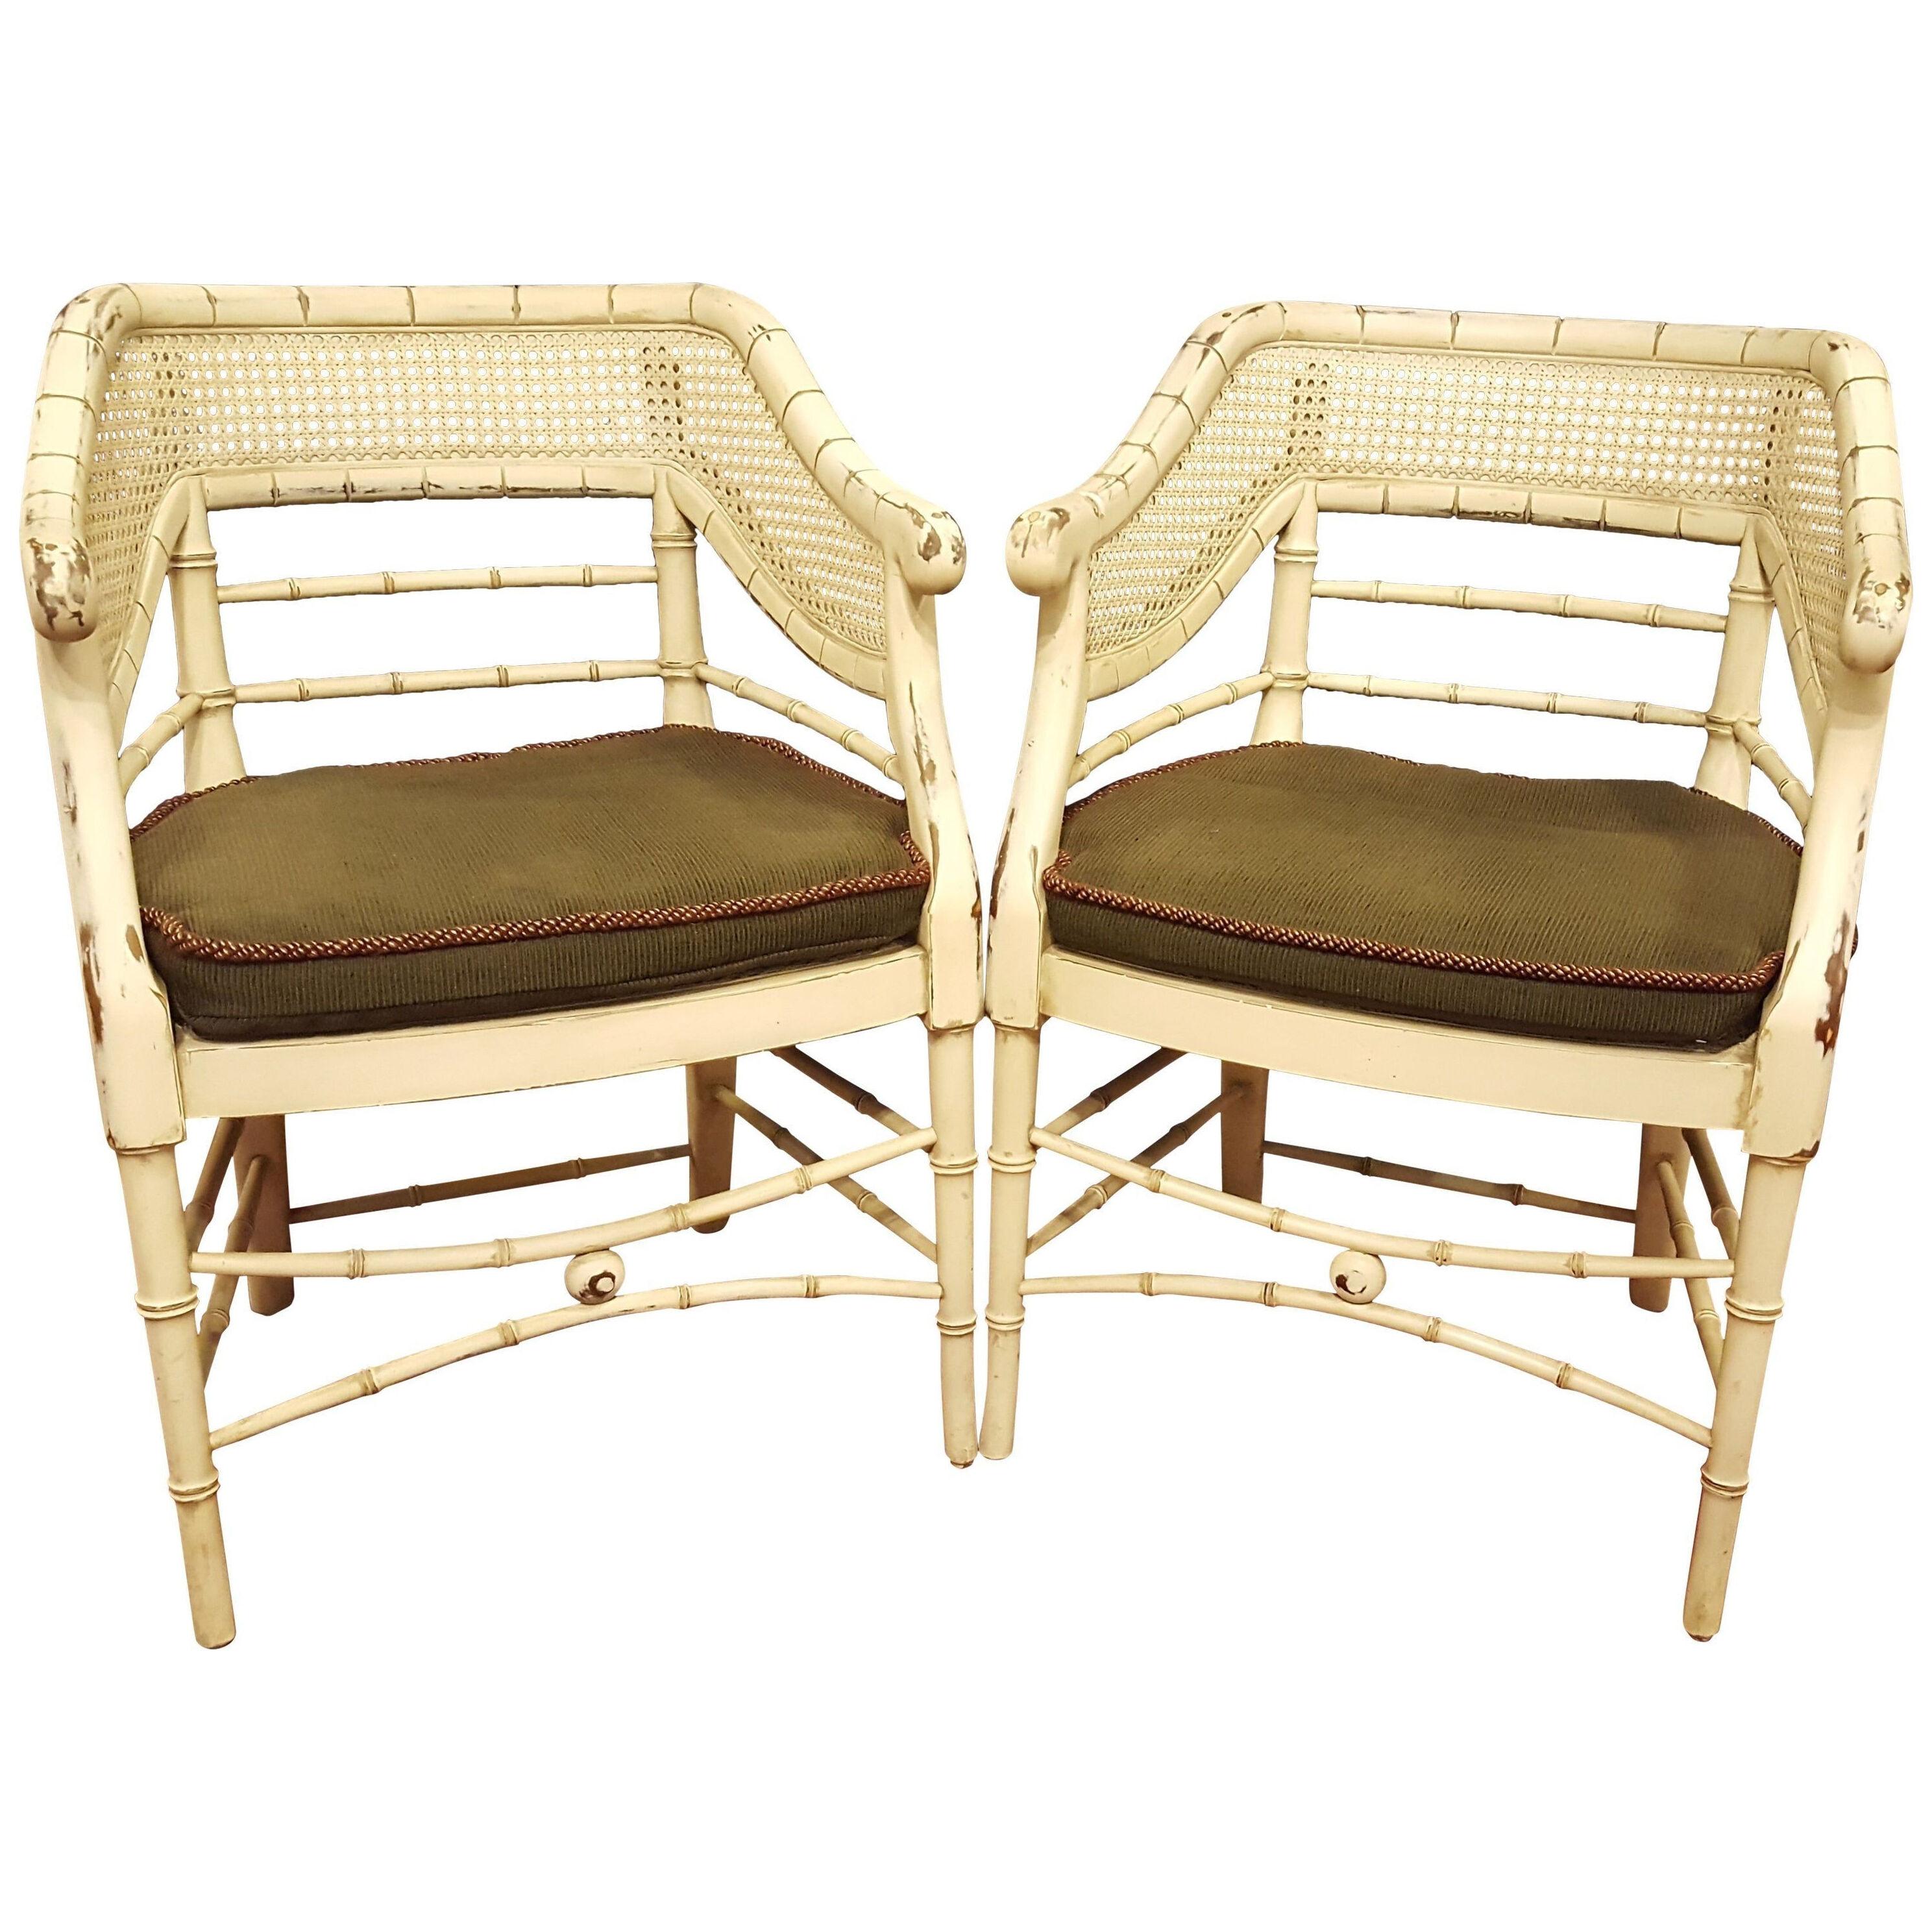 Pair of Mid Century Curved Back Bamboo Arm Chairs Removable Cushion